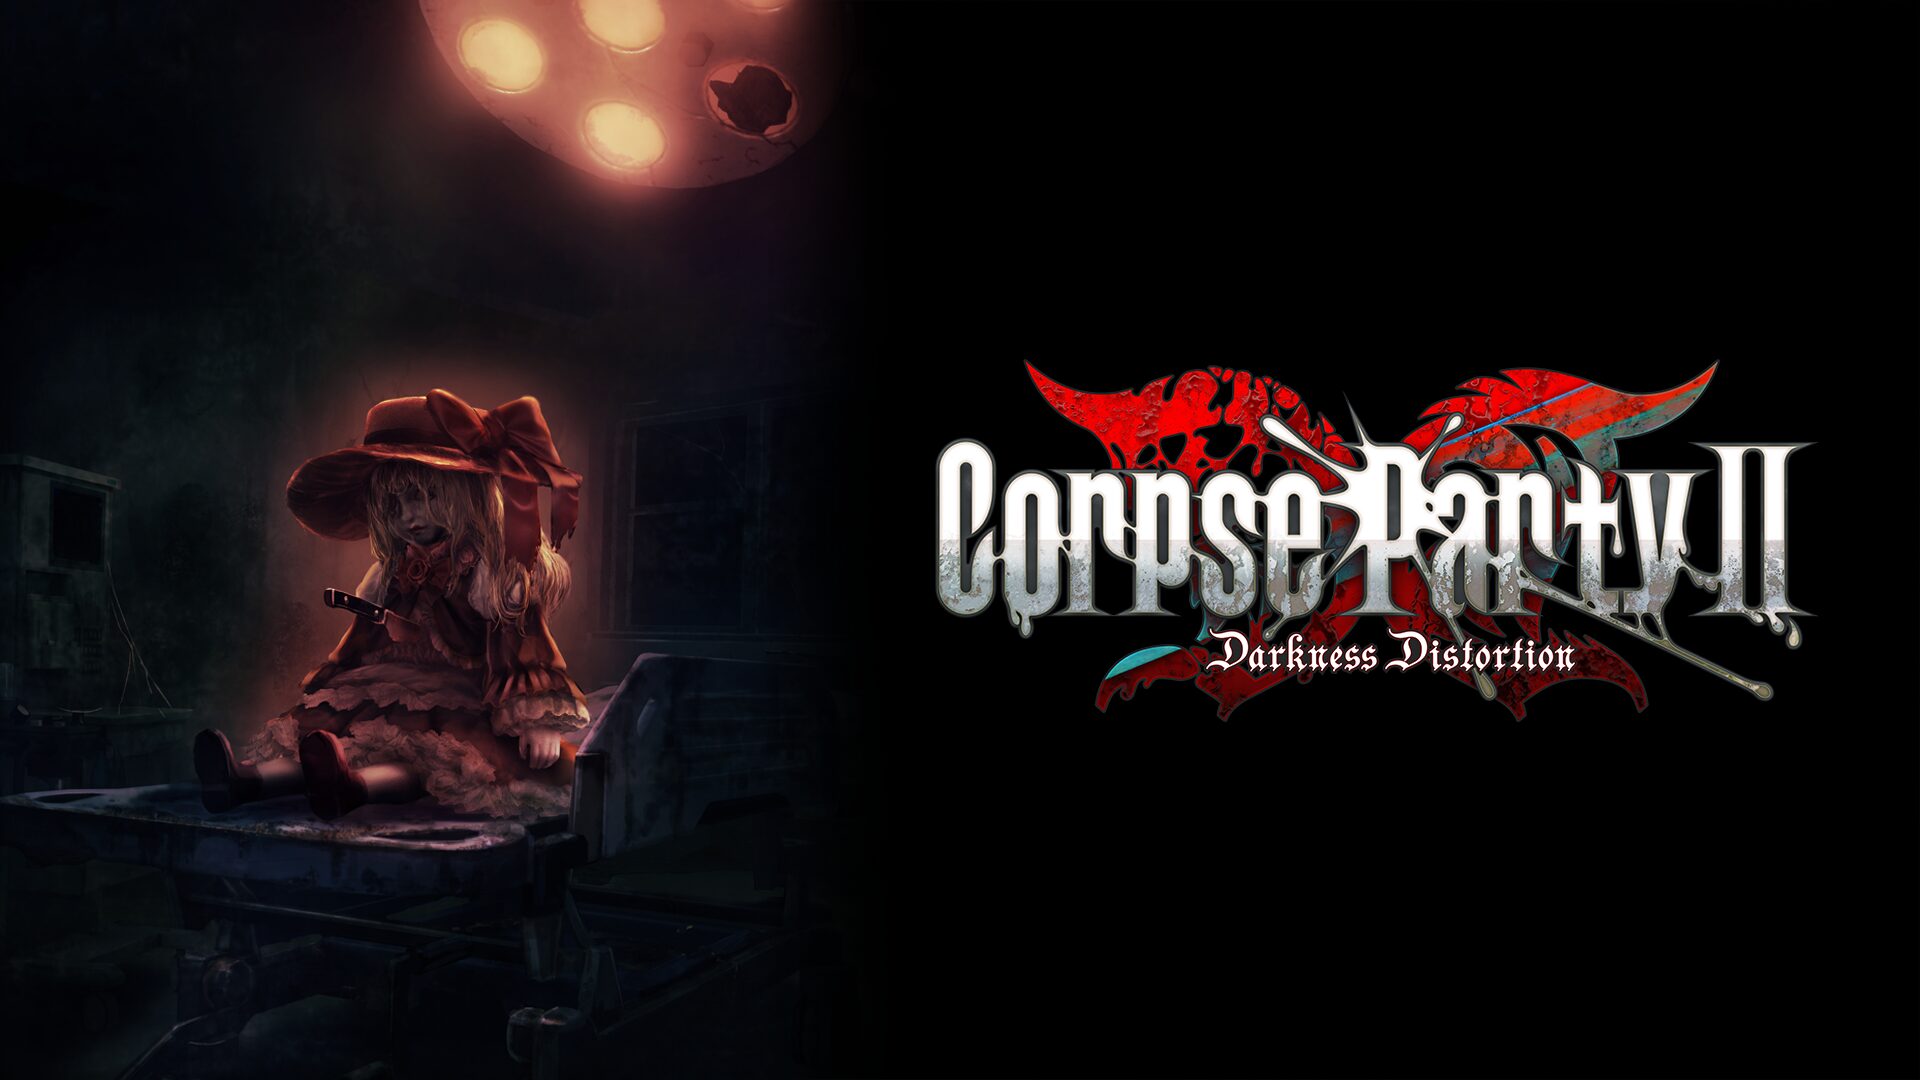 #
      Corpse Party II: Darkness Distortion launches this fall worldwide for PS4, Switch, and PC